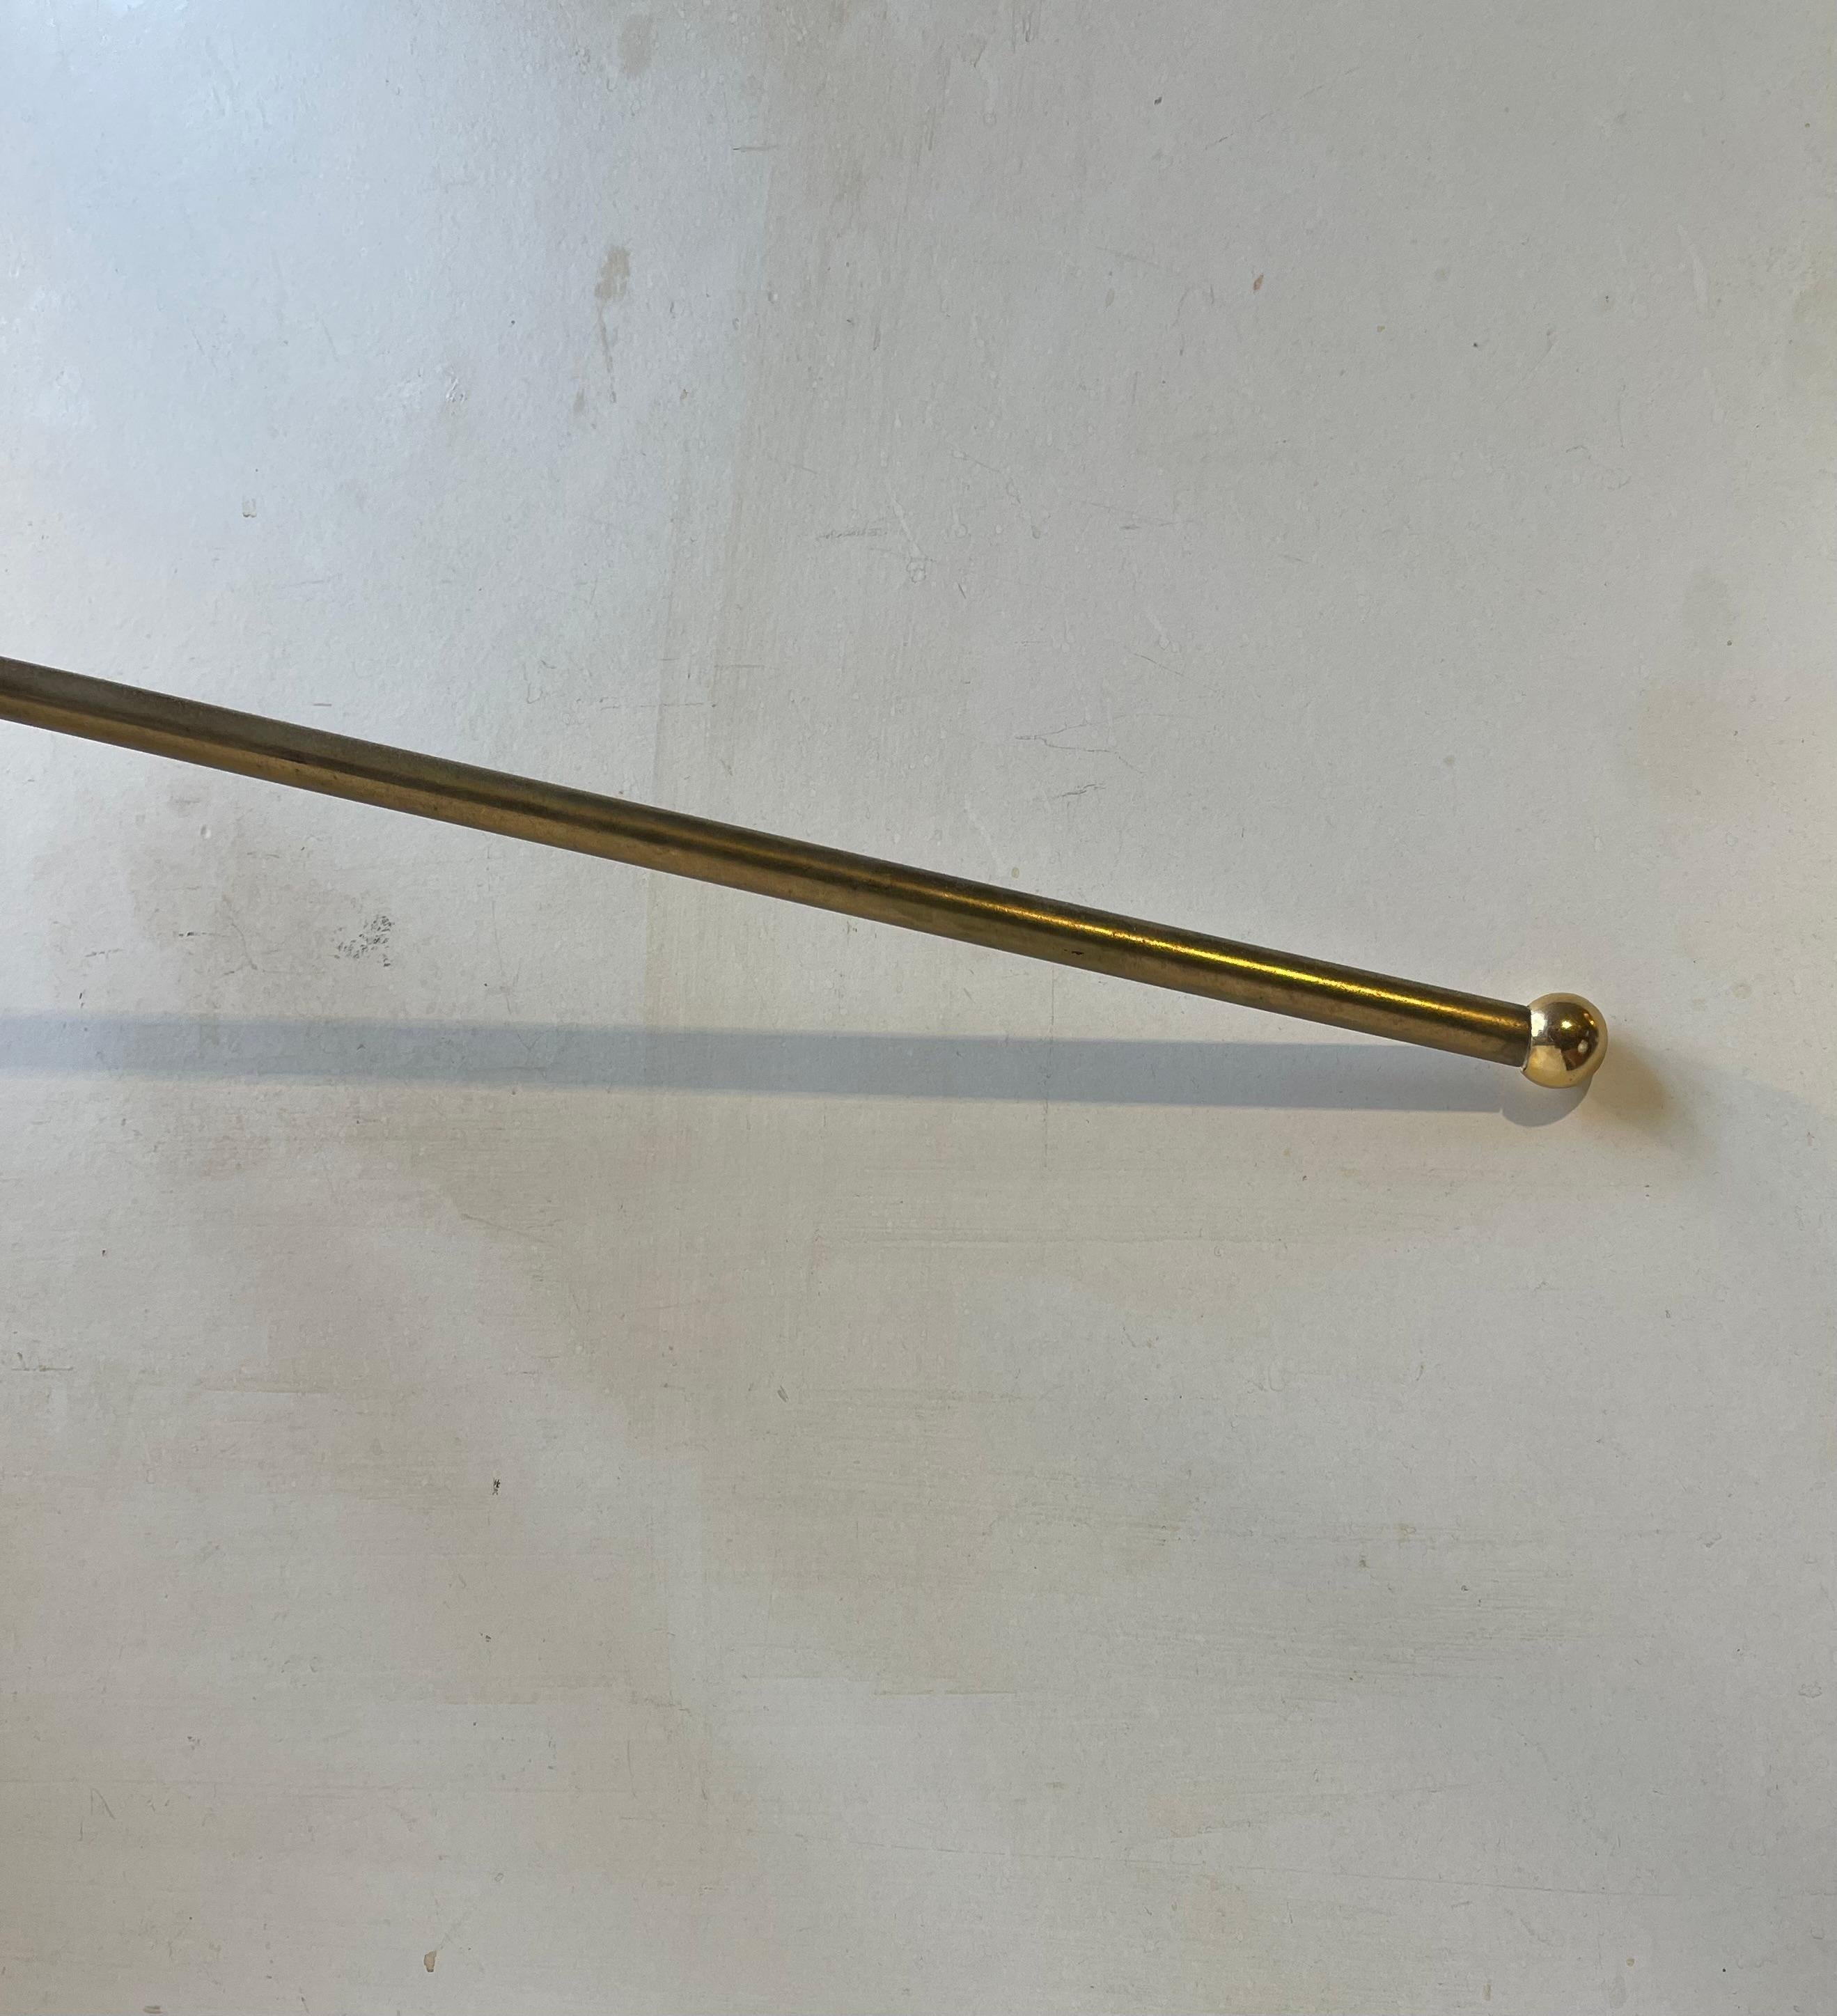 Svend Aage Holm Sørensen Large Articulated Wall Lamp in Teak and Brass, 1950s For Sale 1